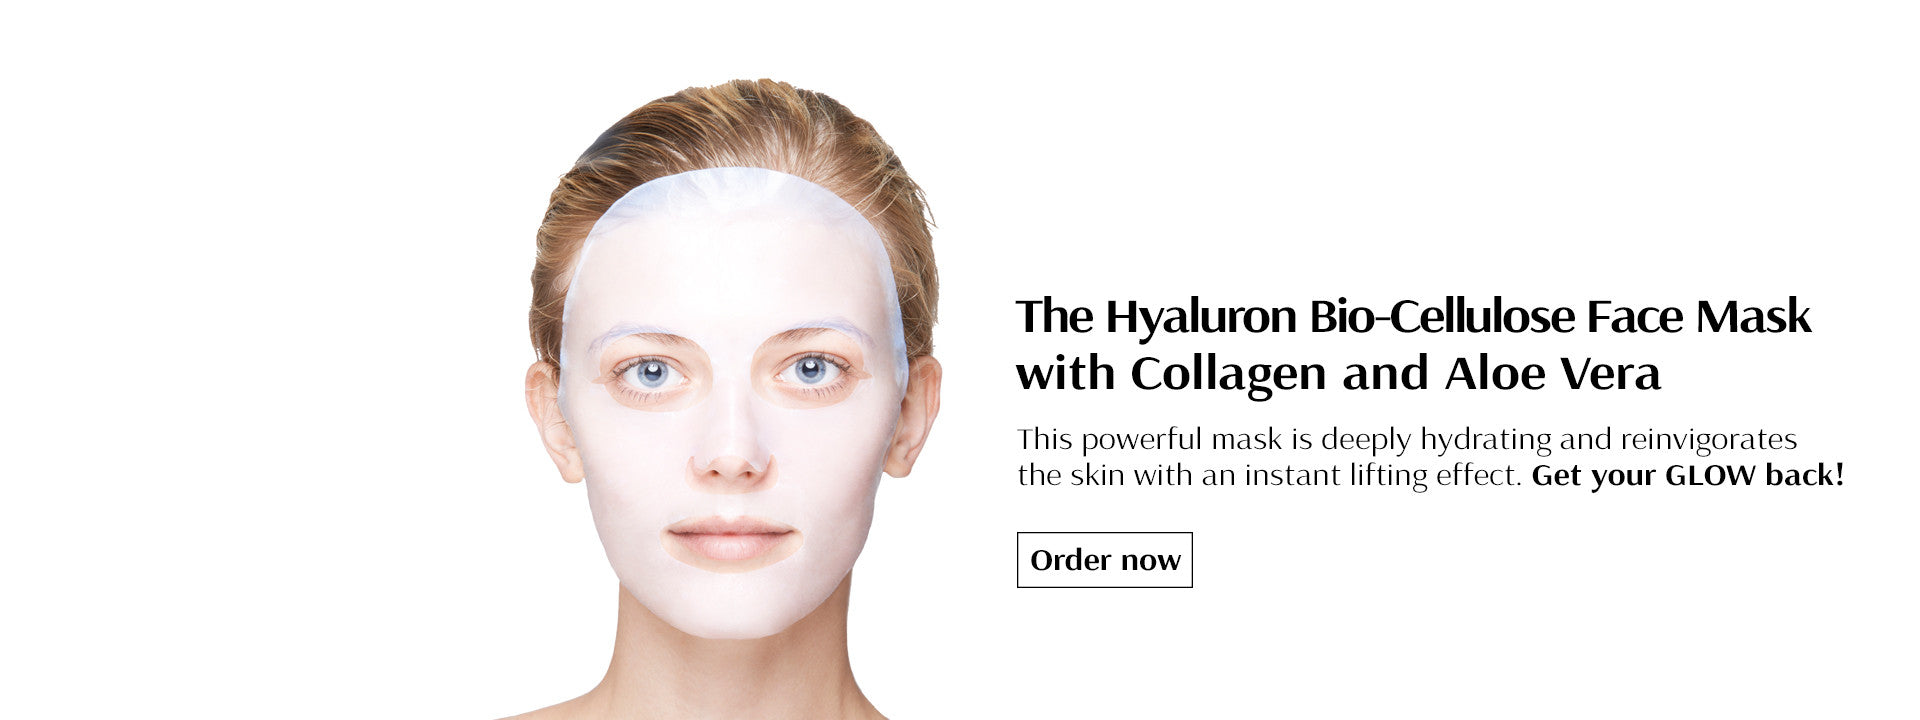 The Hyaluron Bio-Cellulose Face Mask with Collagen and Aloe Vera